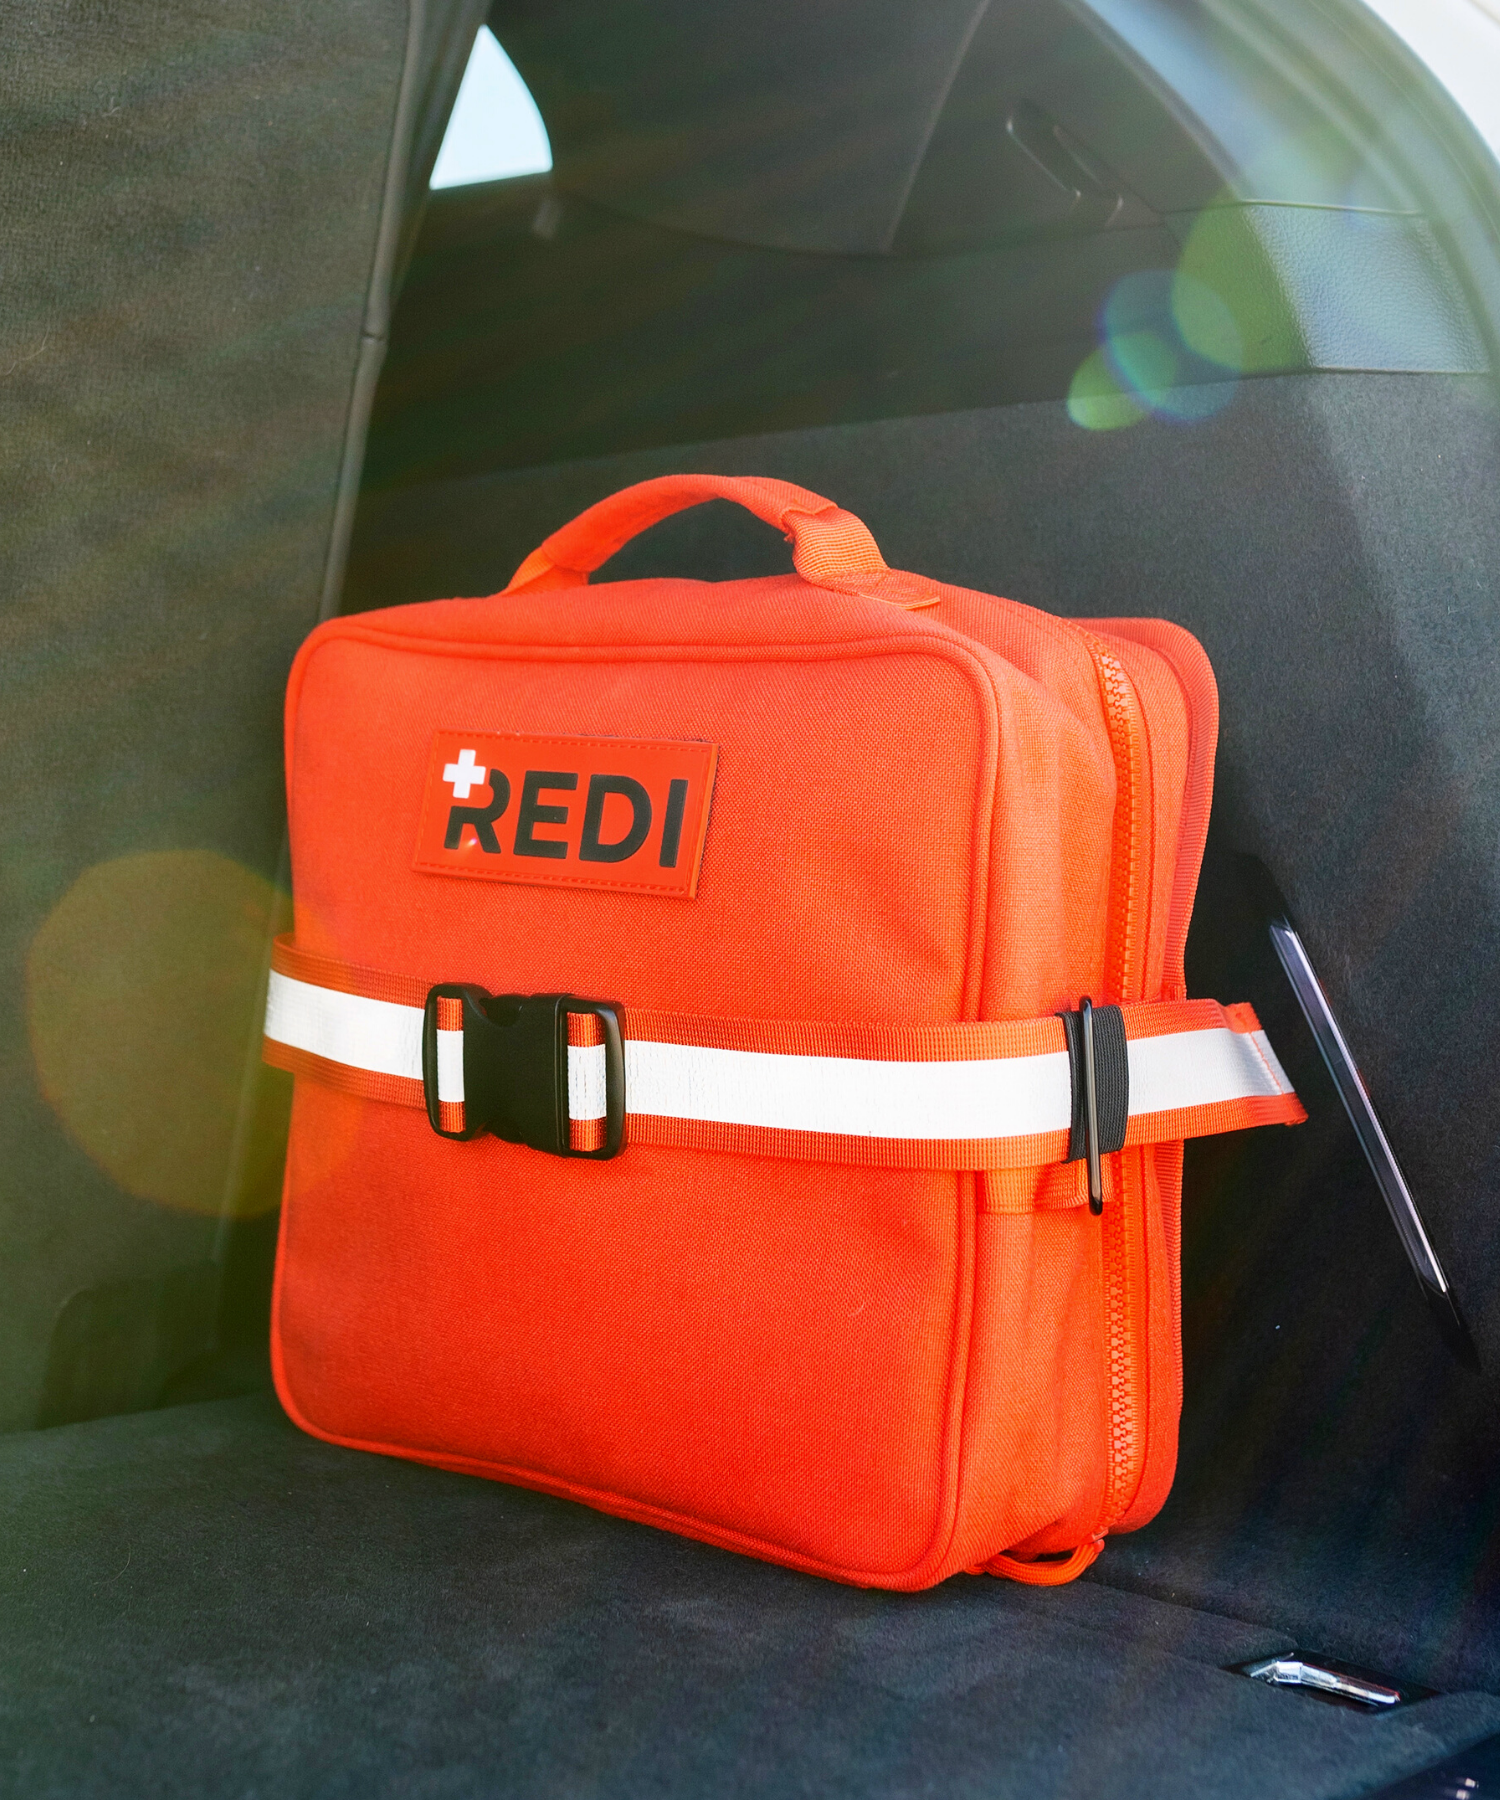 An orange Roadie car, first aid kit attached in the trunk of a car, ready for emergencies on the road.